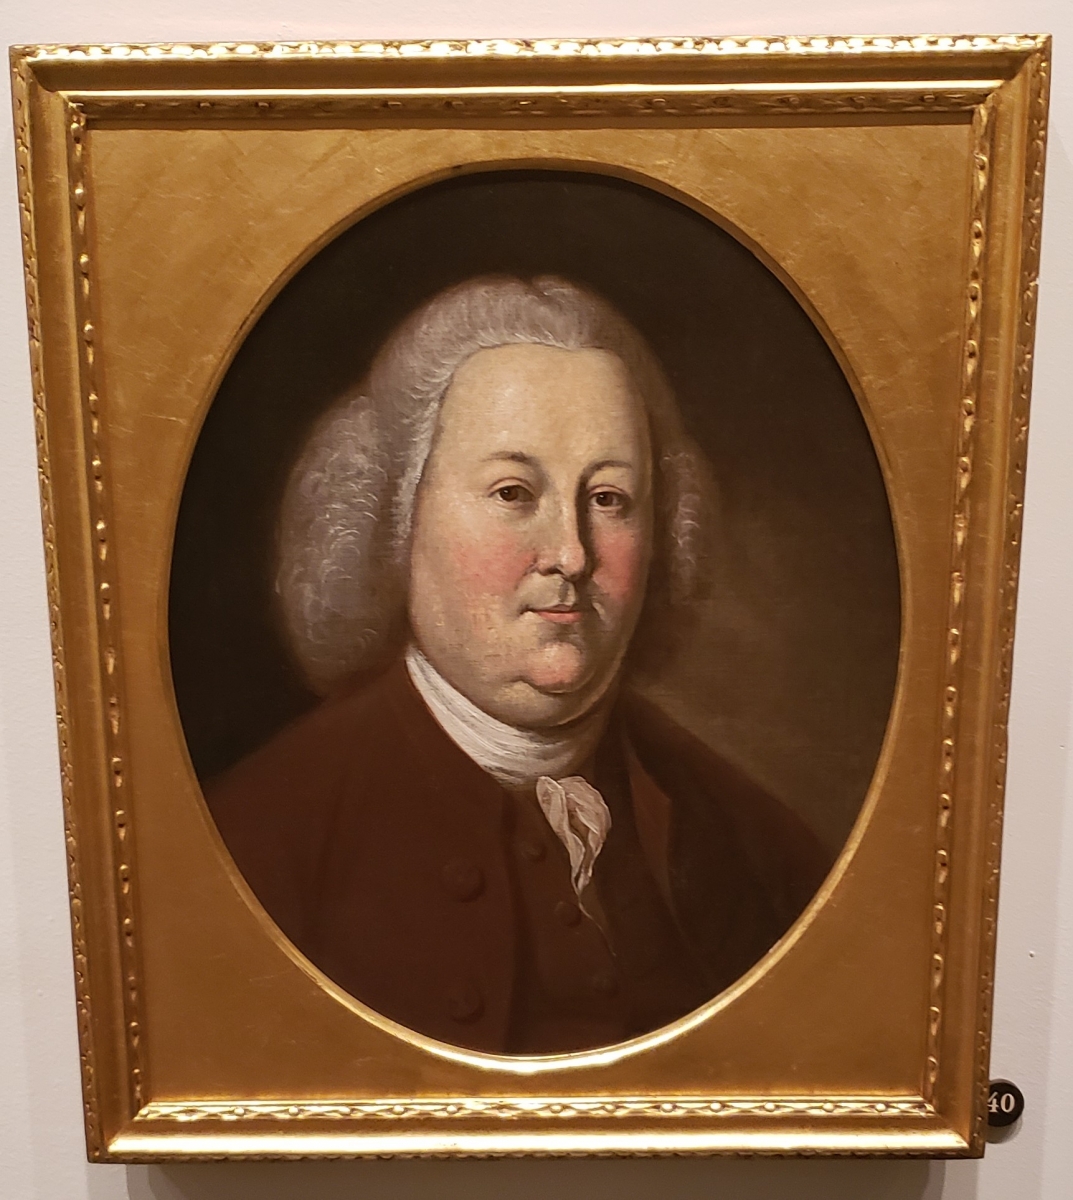 Portrait of Peyton Randolph hanging in the Second Bank of the United States Portrait Gallery